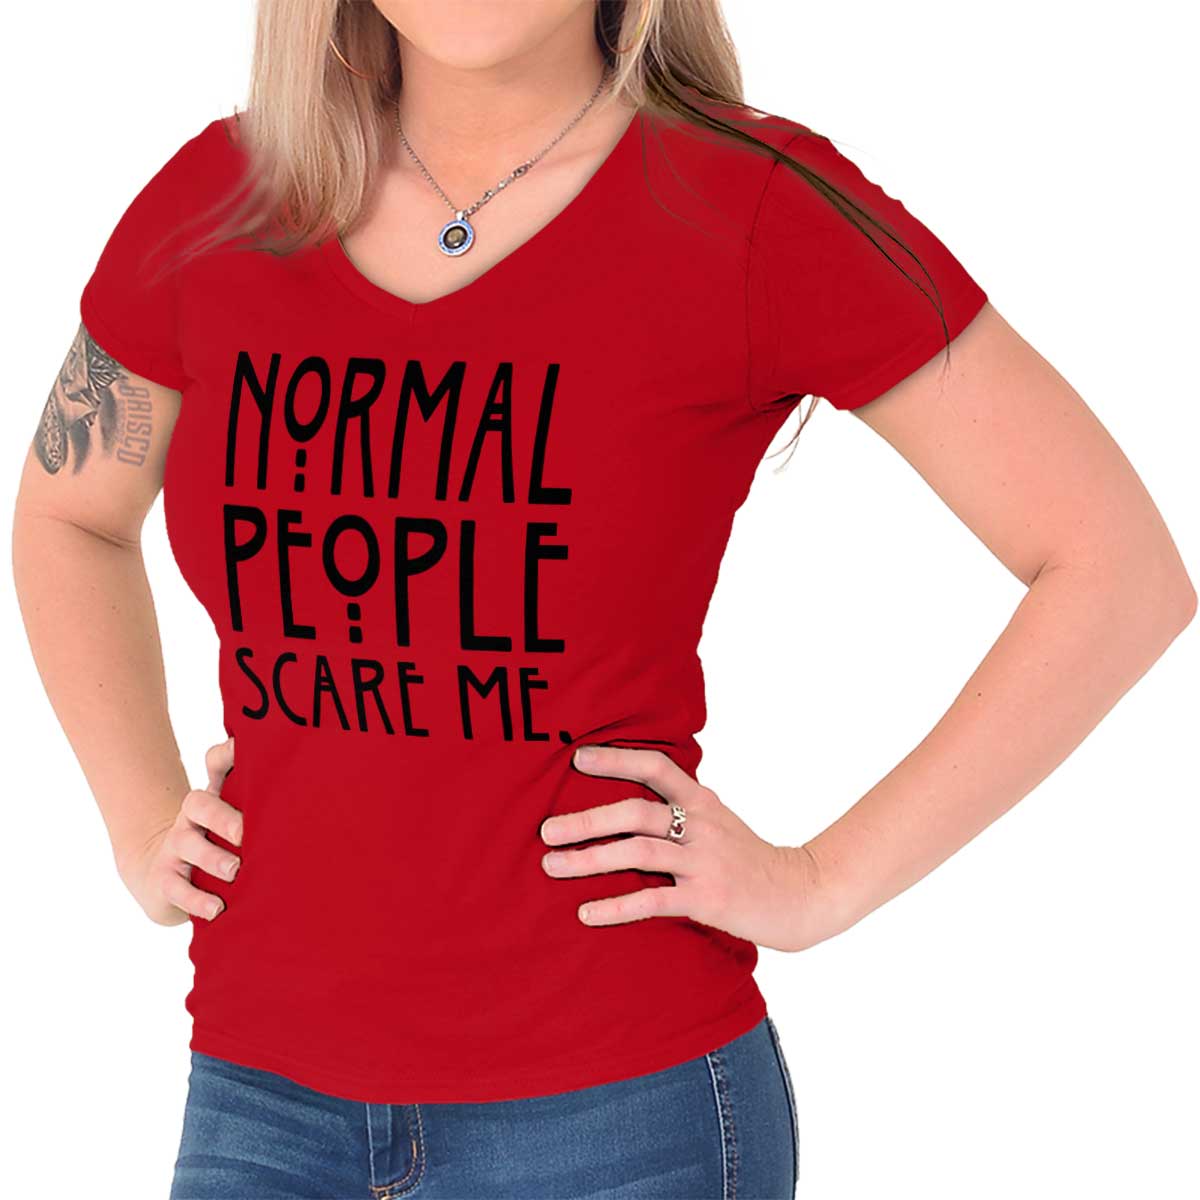 Normal People Scare Me Horror TV Show Gift Junior V-Neck T-Shirts Tee ...